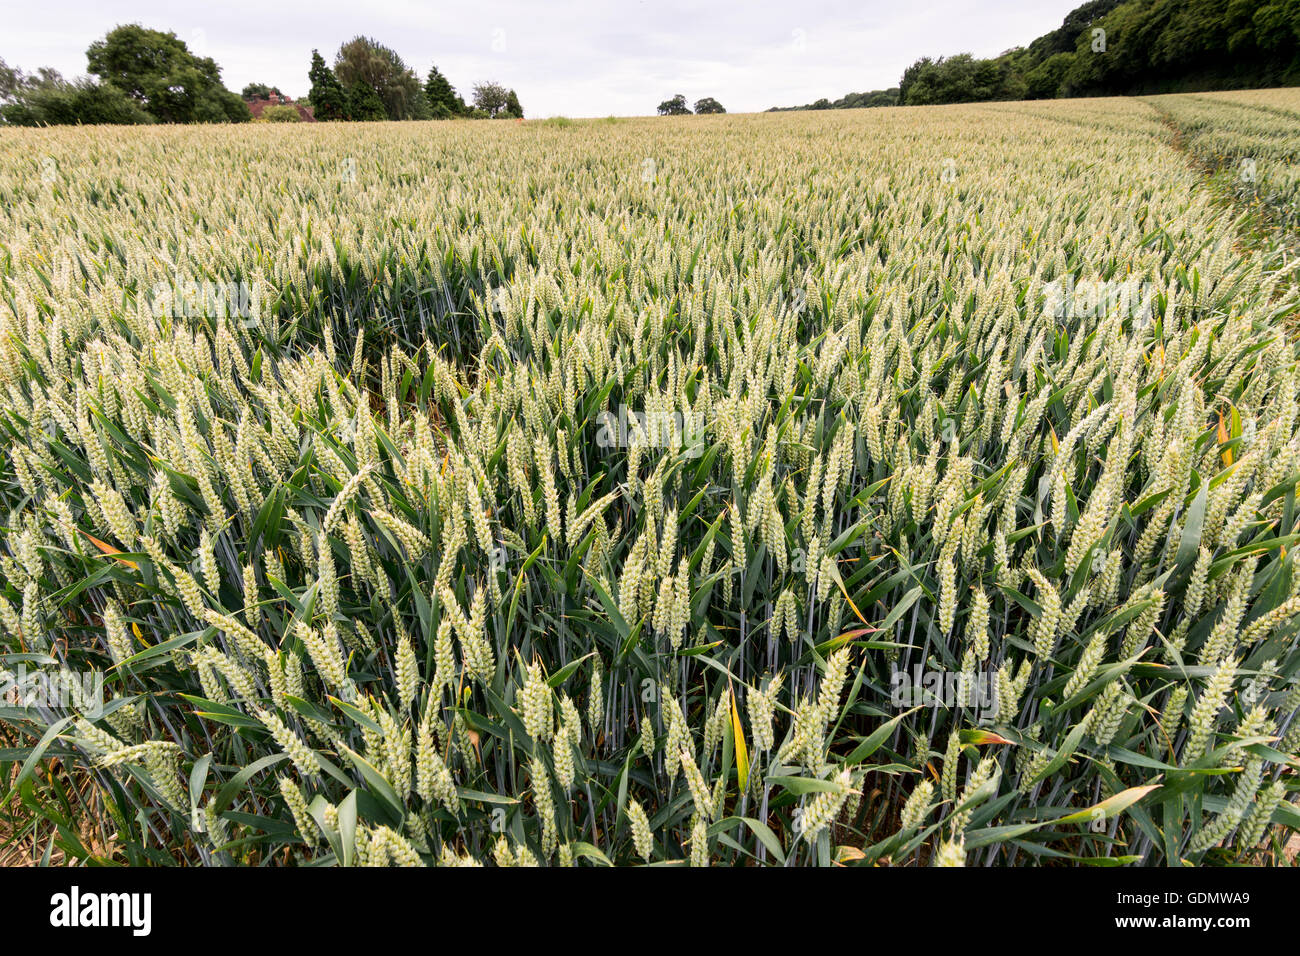 Wheat field with a crop of young wheat Stock Photo